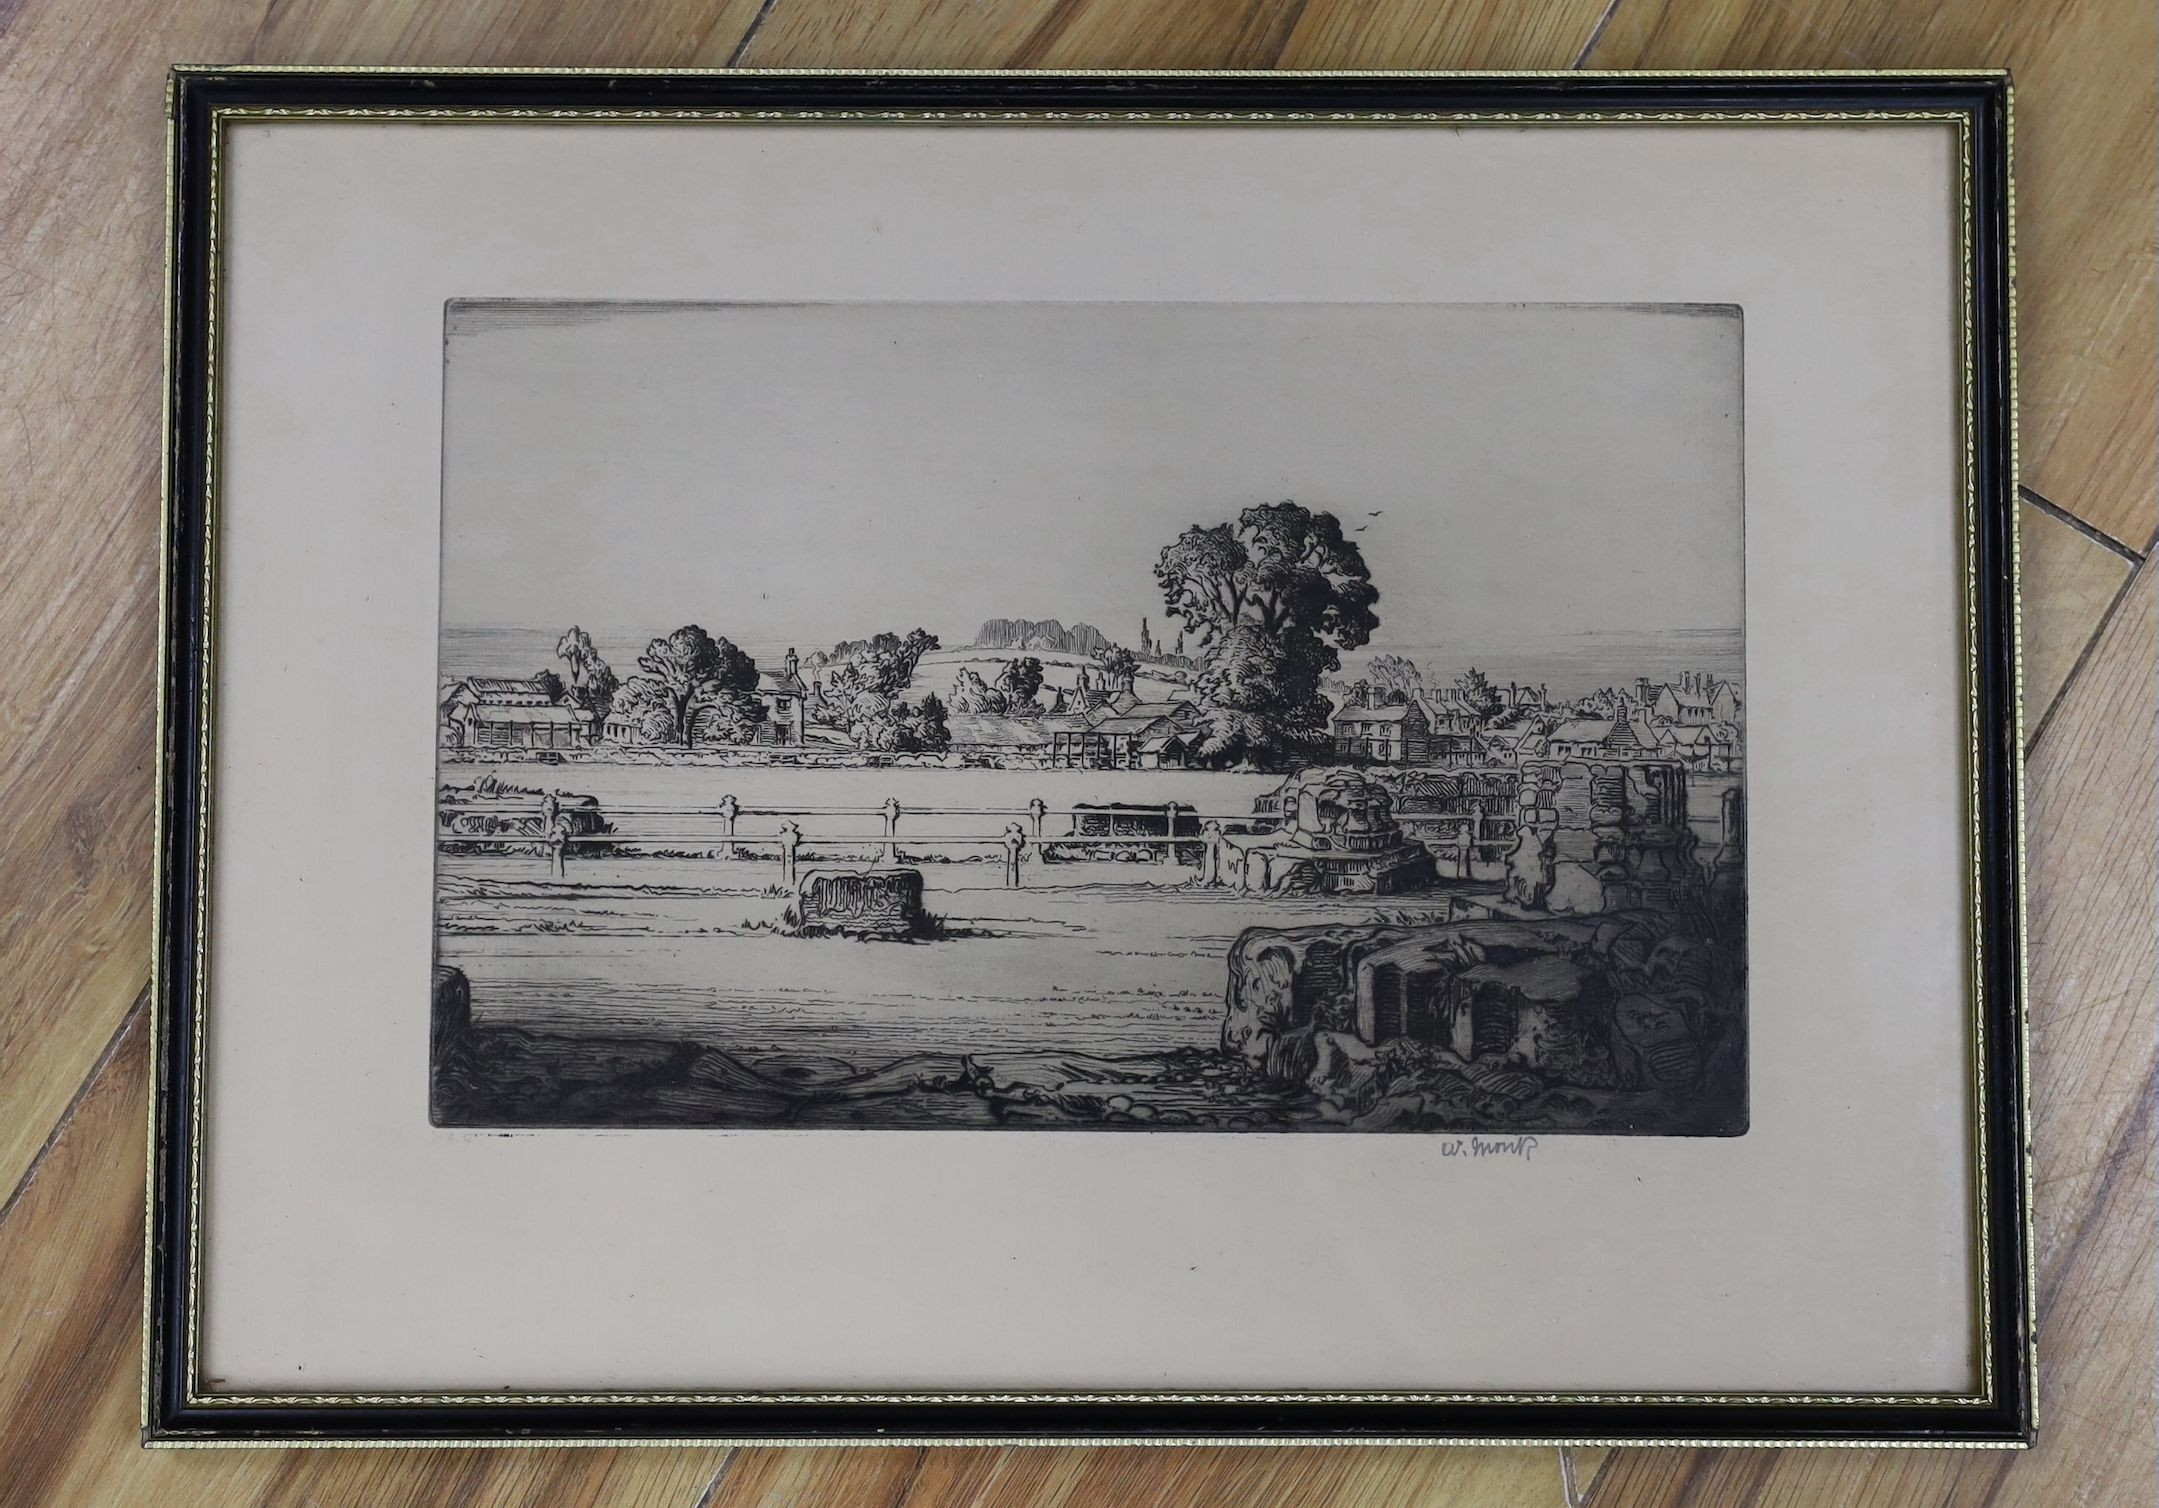 William Monk (1863-1937), drypoint etching, English landscape with ruins, signed in pencil, 18 x 28cm